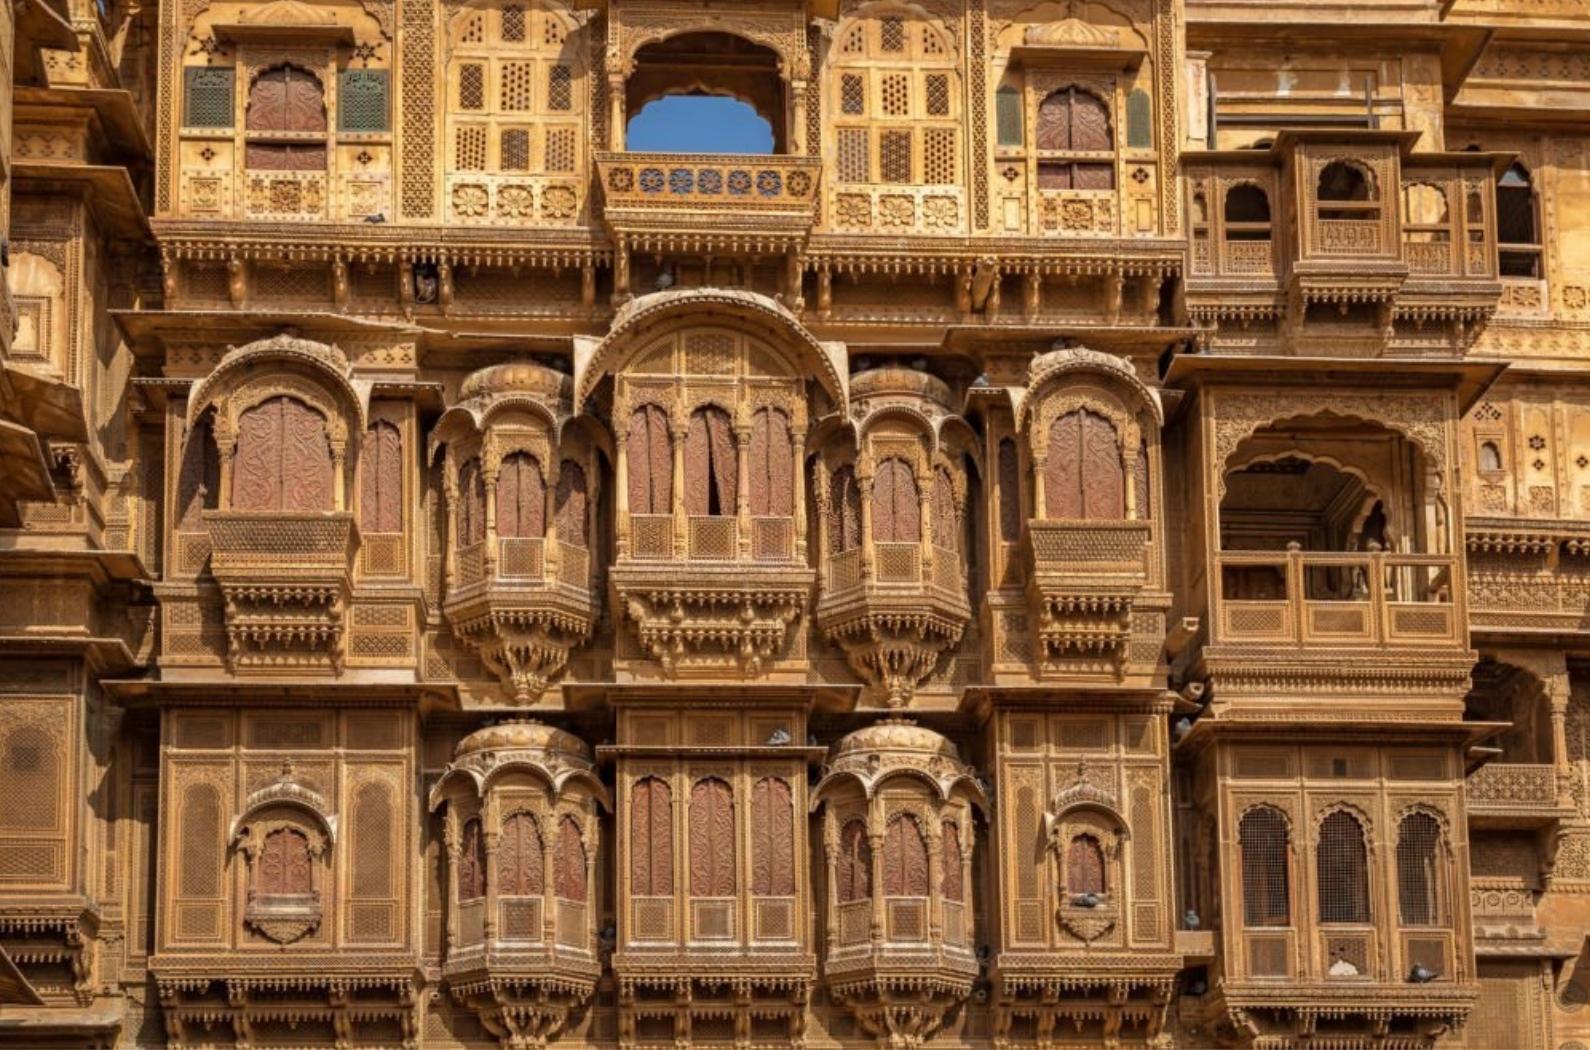 Rajasthan heritage building exterior with intricate stone artwork known as the Patwon ki haveli at Jaisalmer. A popular tourist destination.